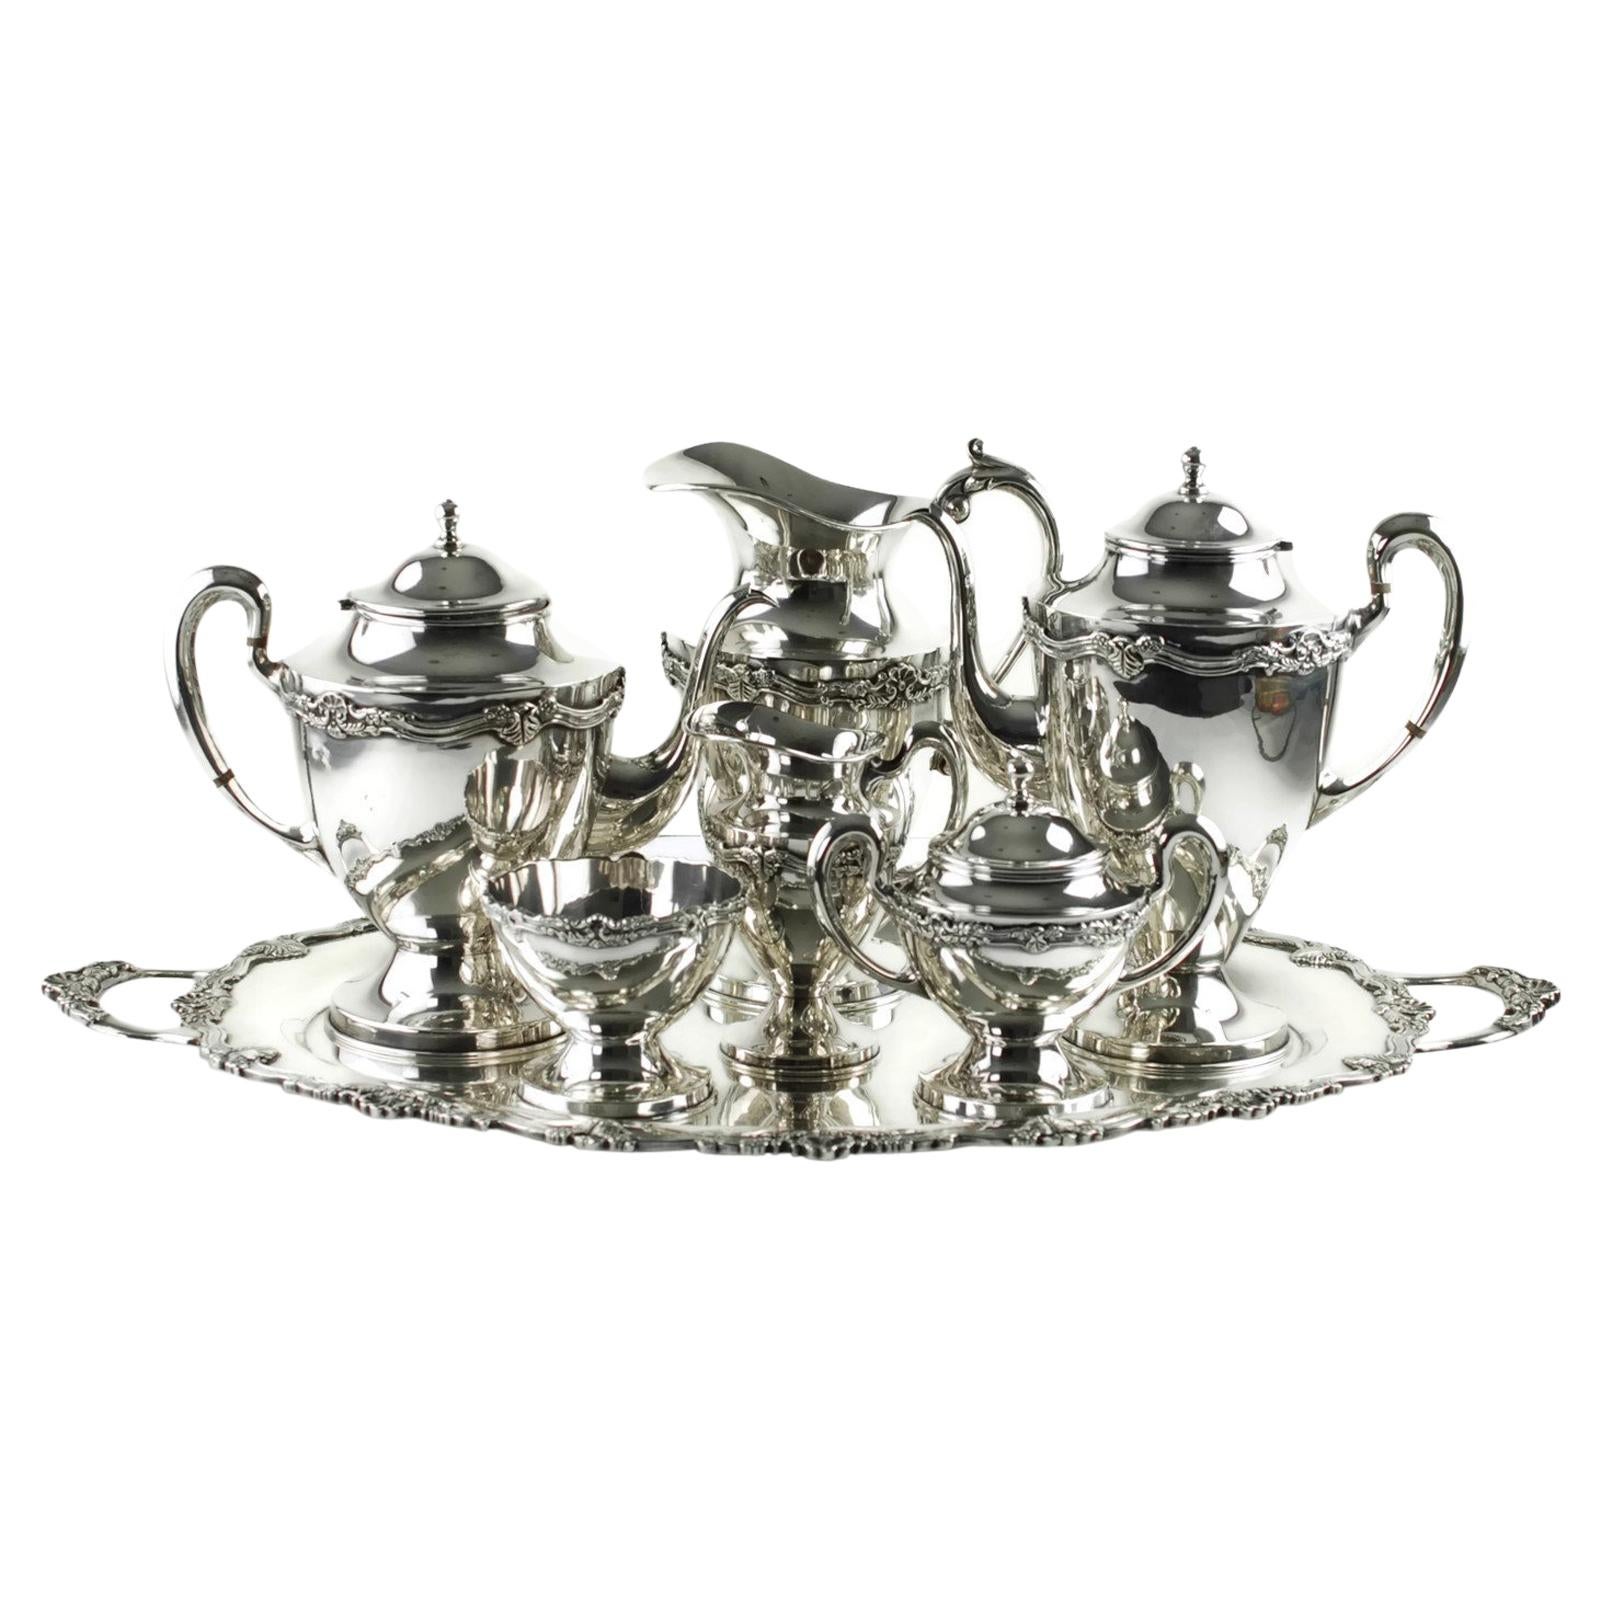 Gonzalo W Moreno 7-Piece Sterling Tea Set Including Serving Tray & Water Pitcher